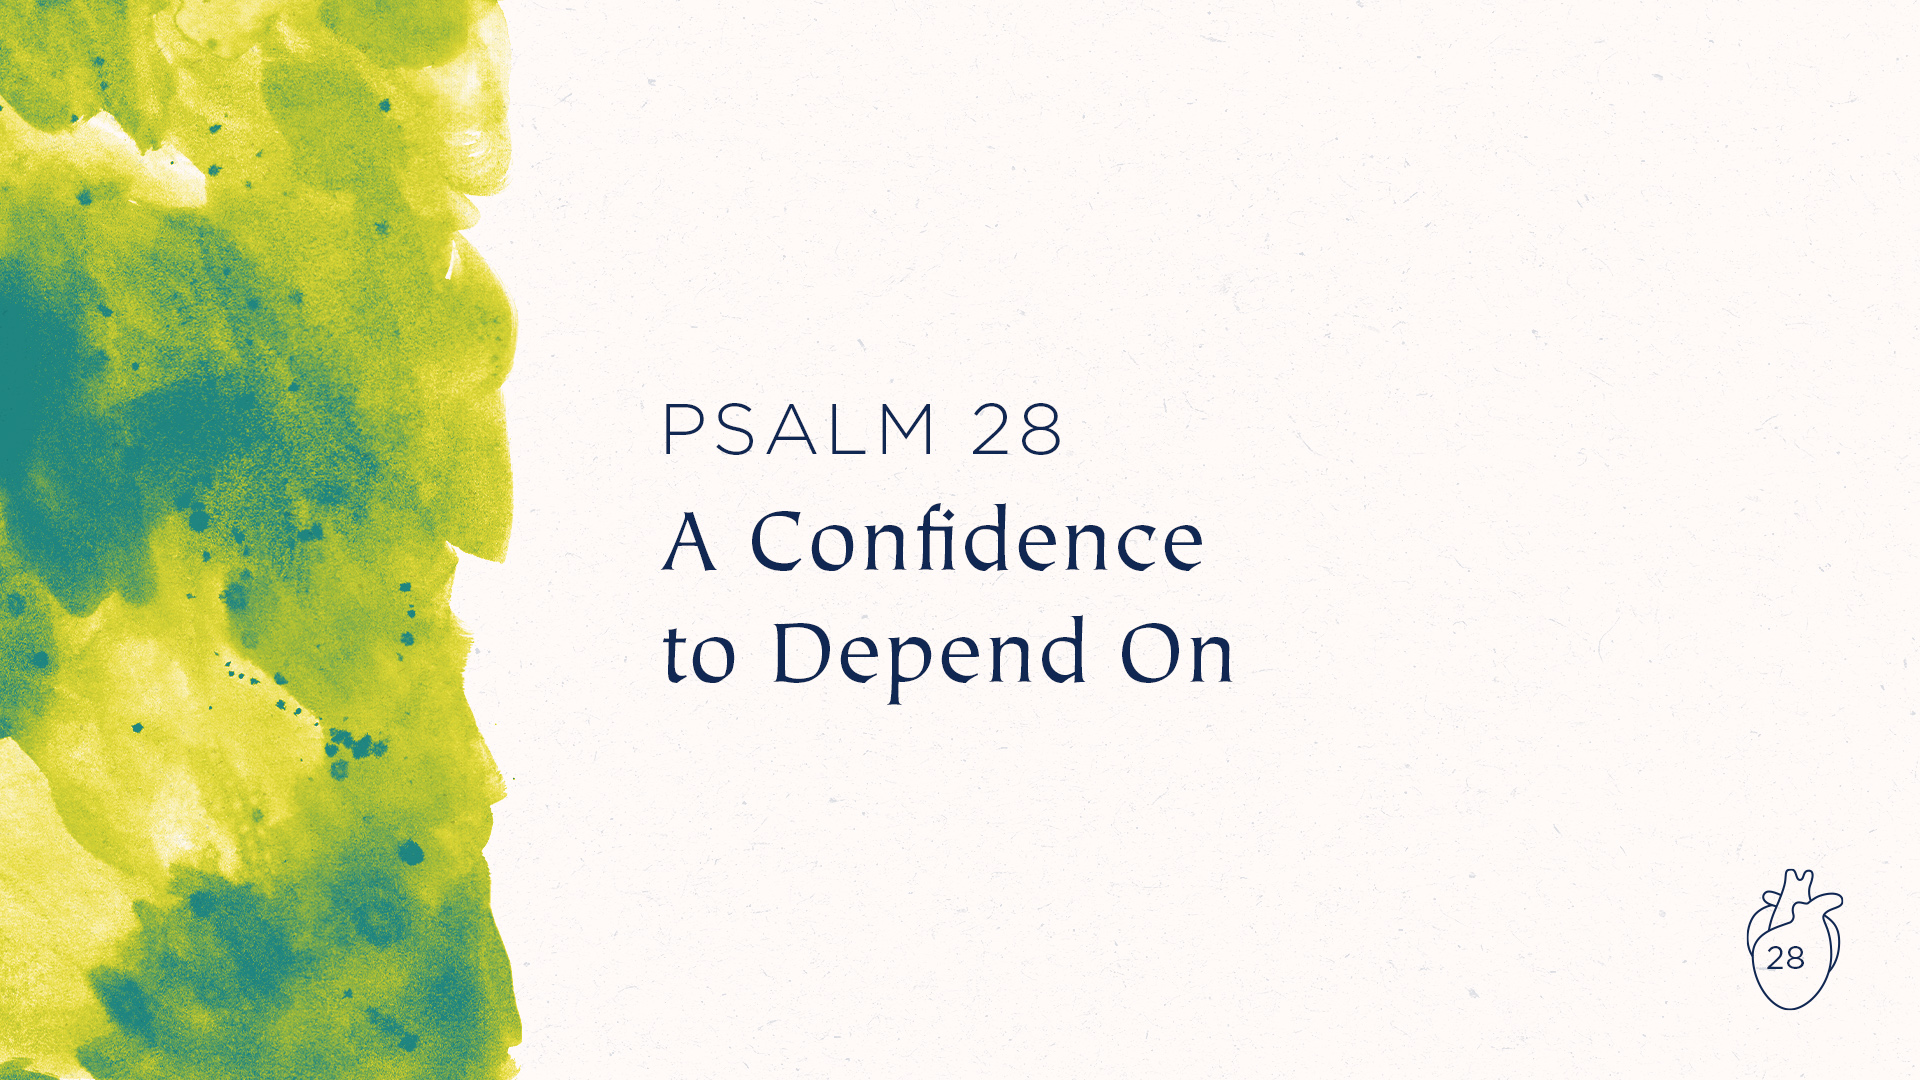 A Confidence to Depend On